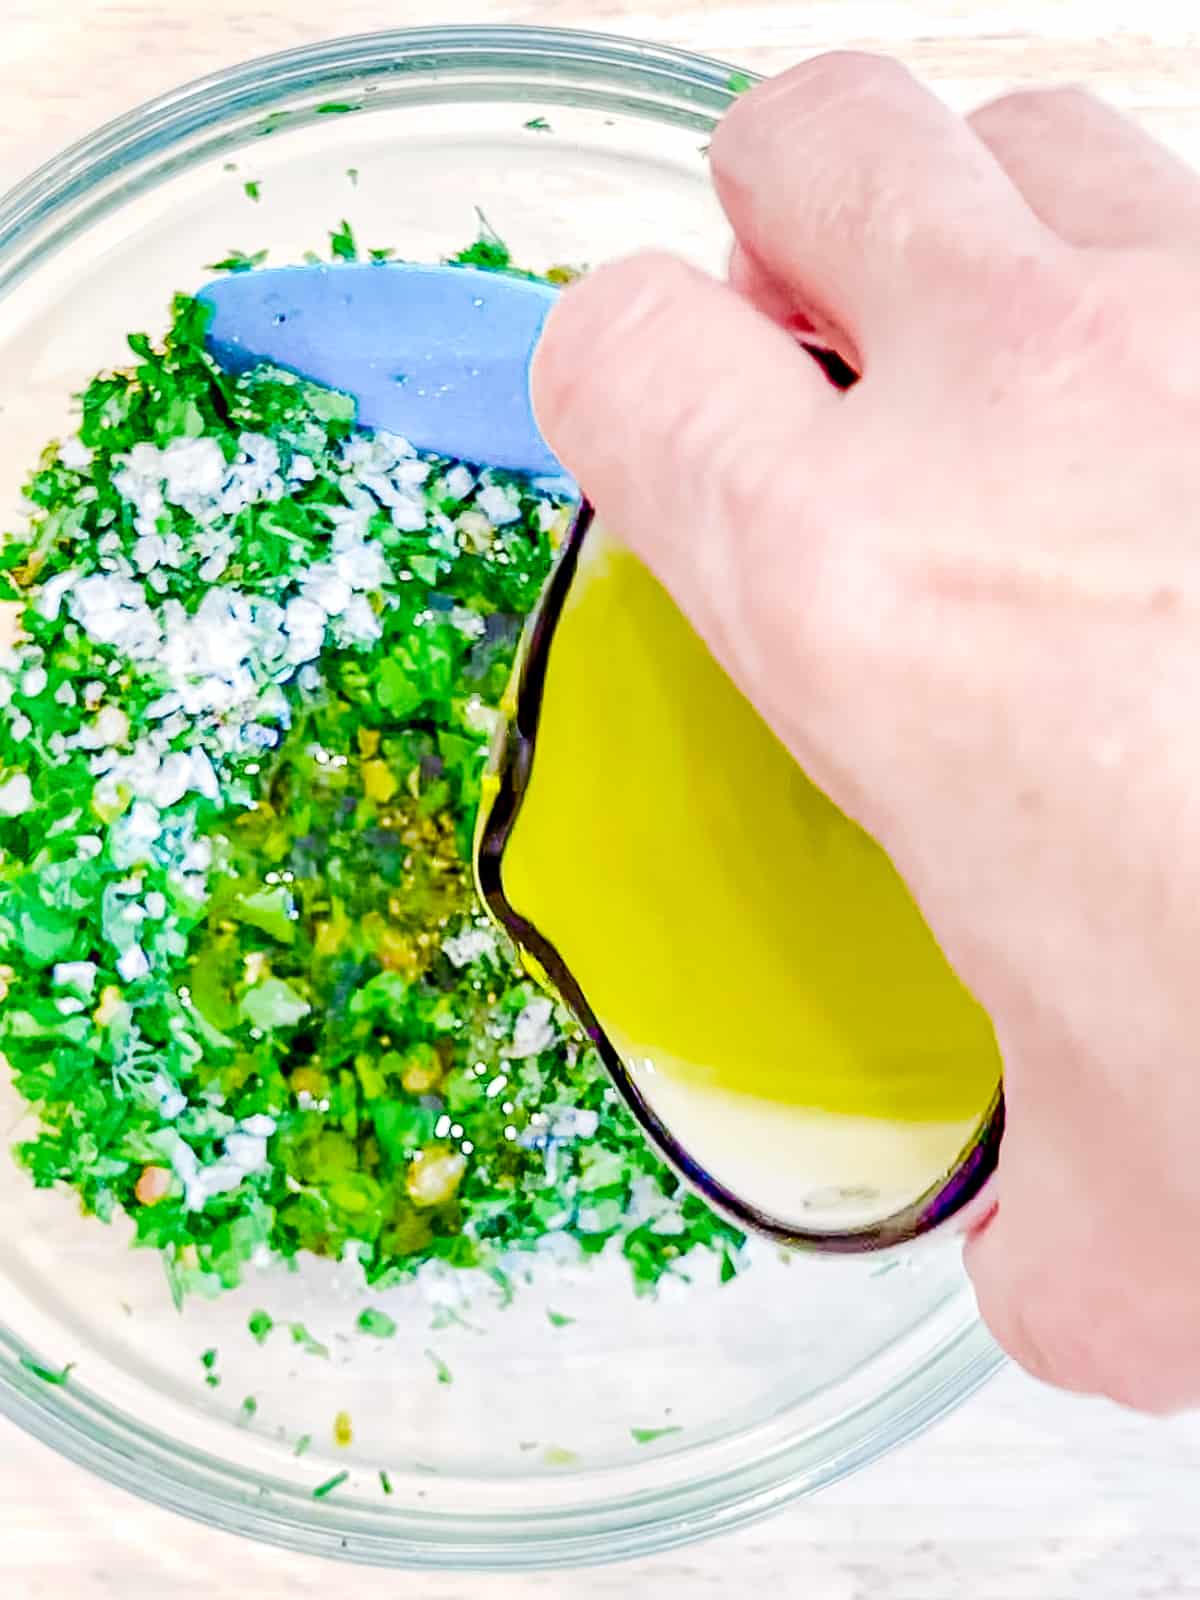 Adding olive oil to herb mixture.